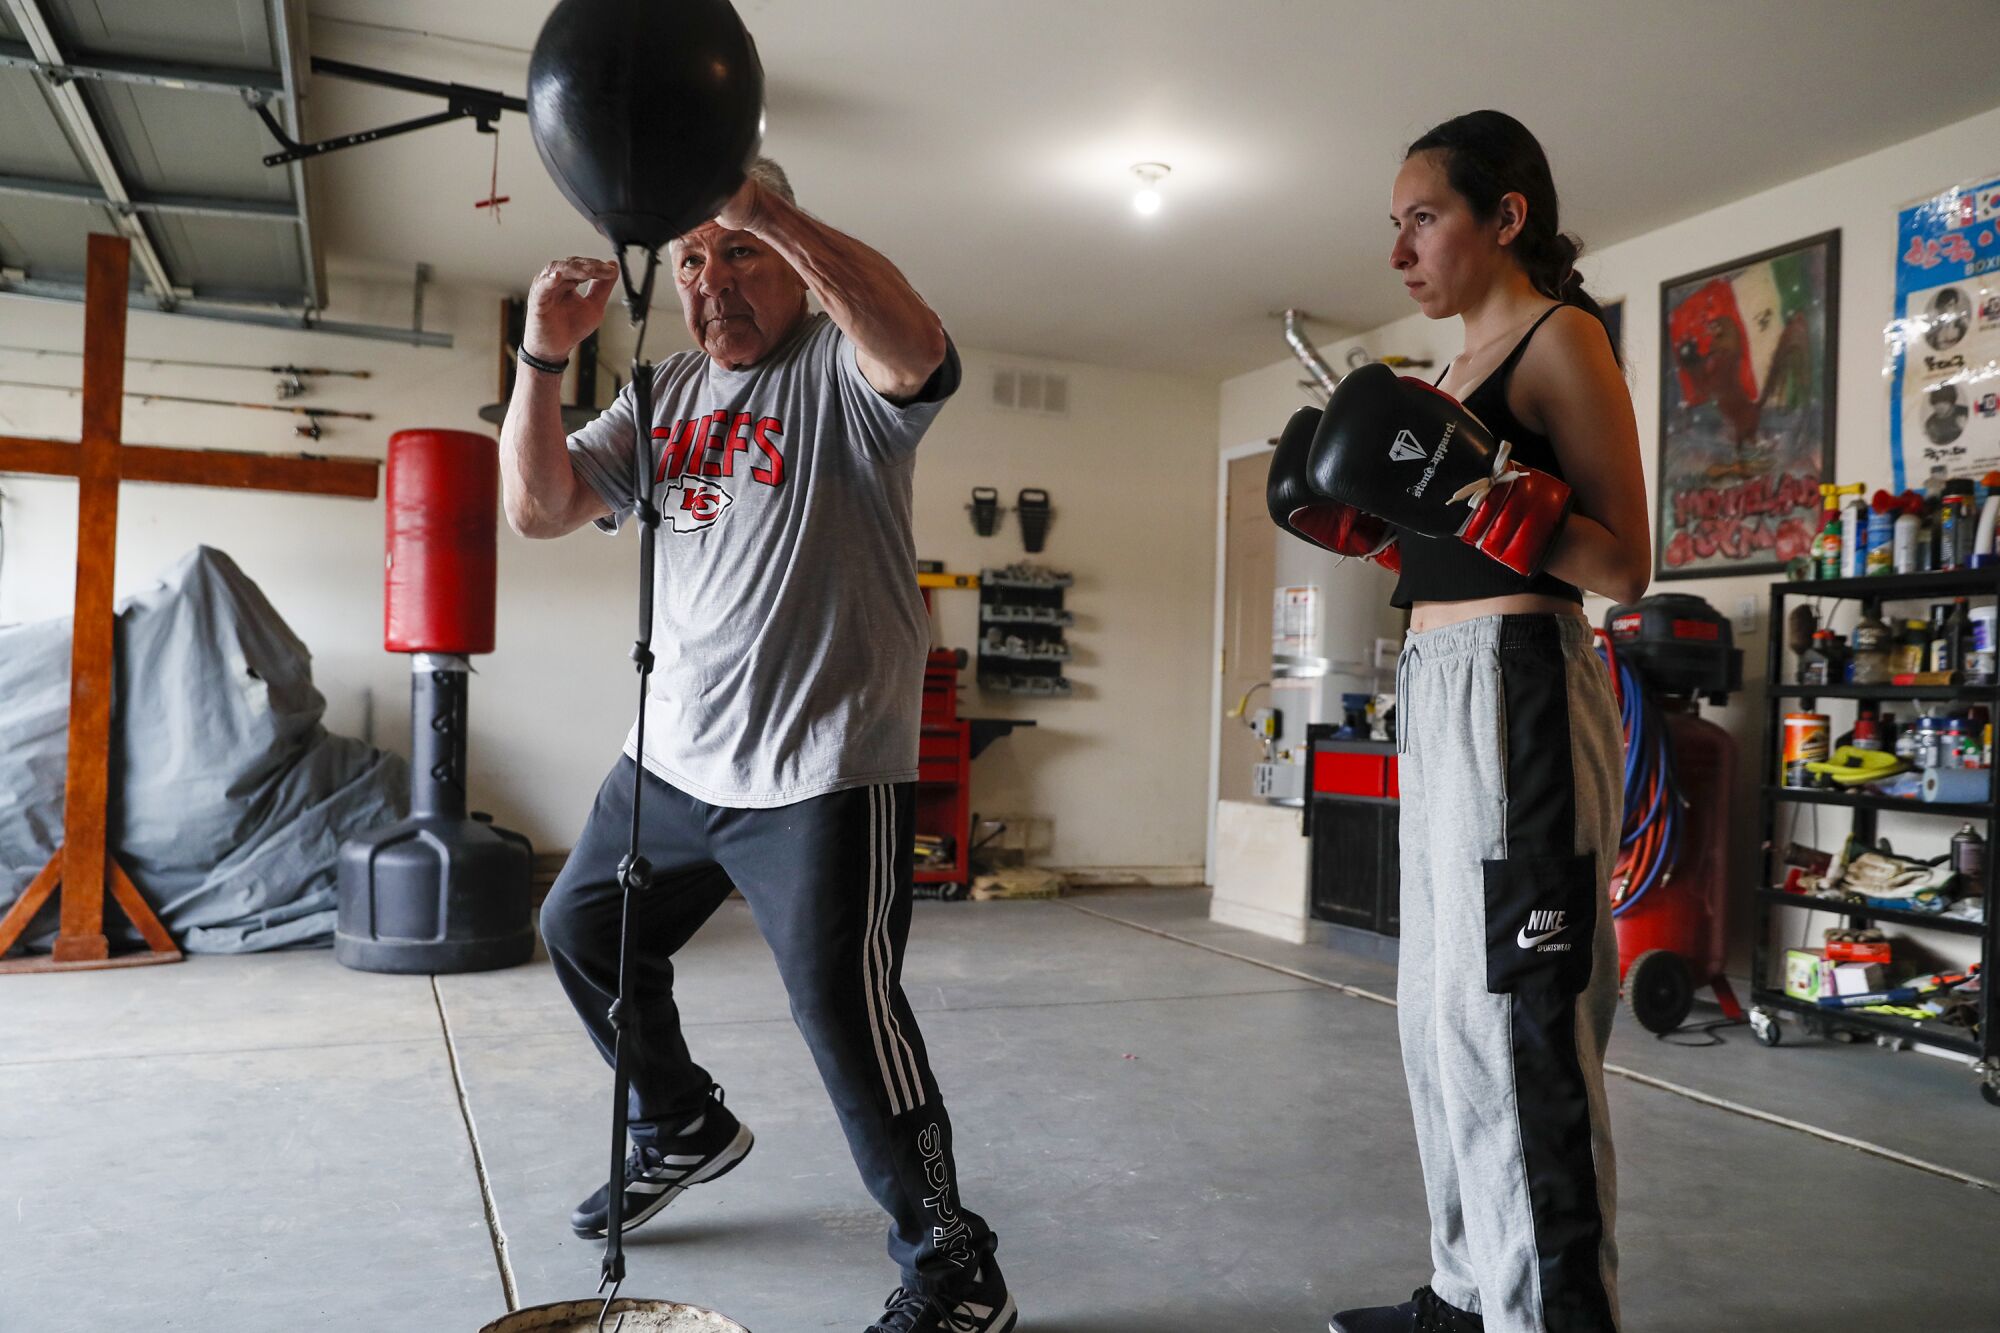 Gonzalo Montellano, 65, helps young fighters learn the sport, but won't train them to compete.